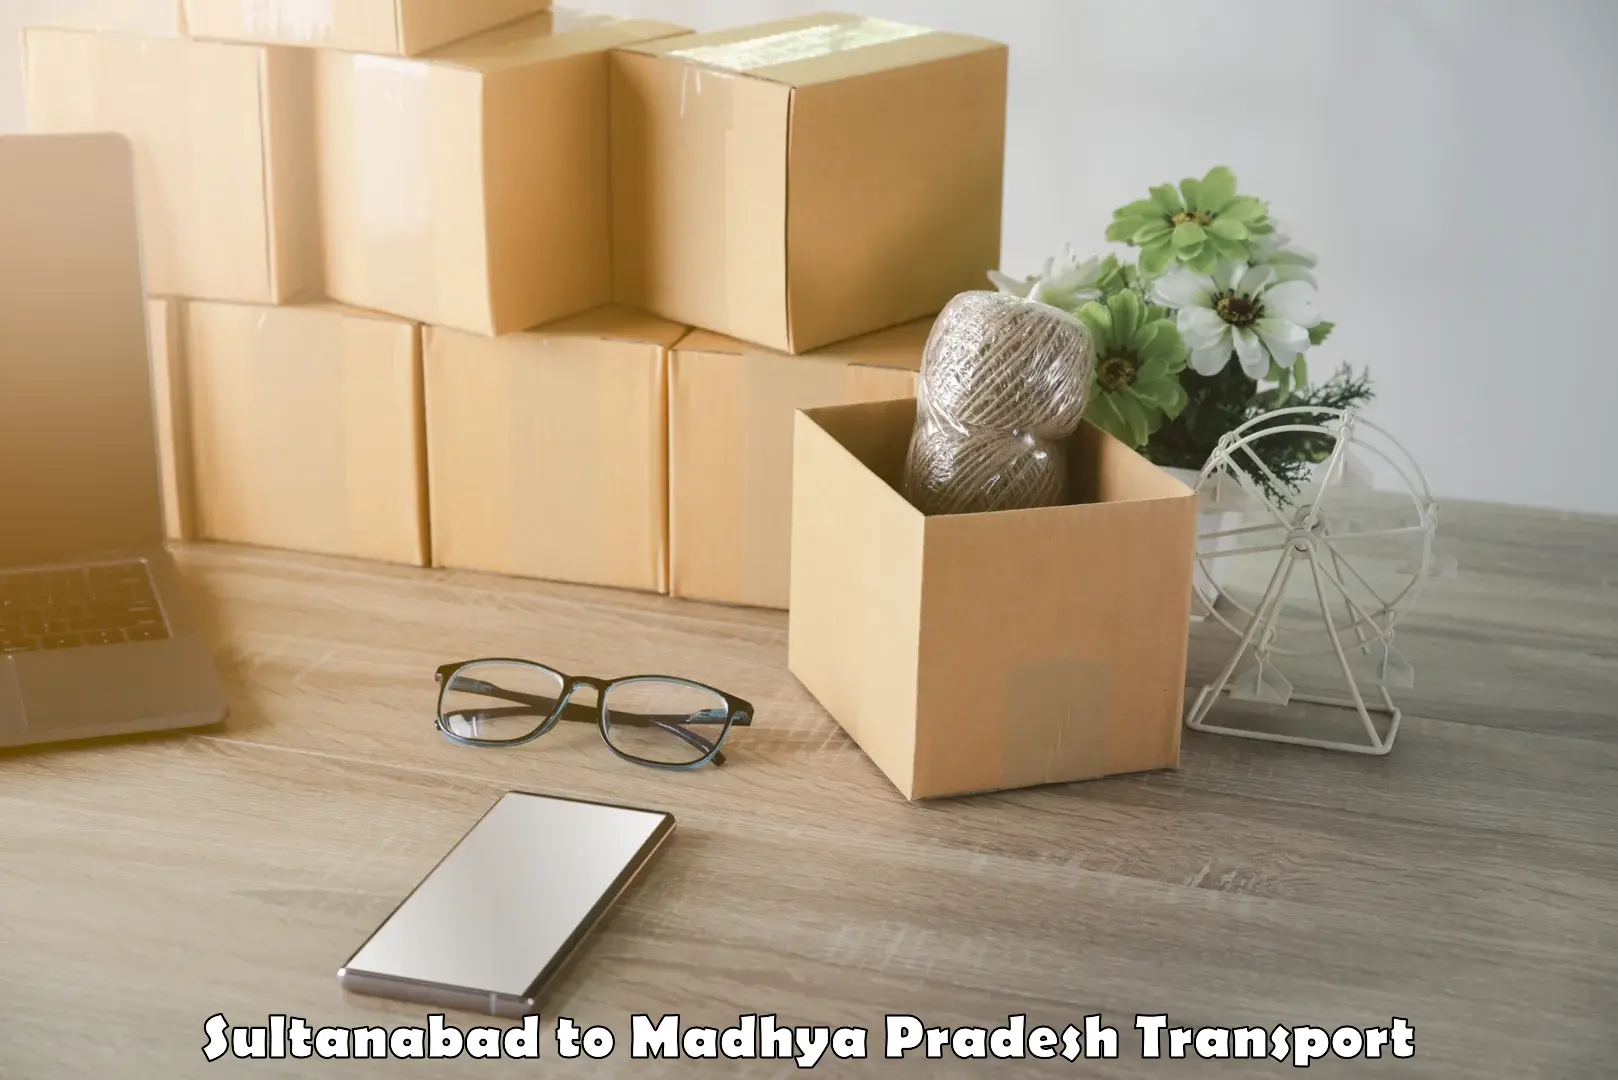 Domestic transport services Sultanabad to Indore